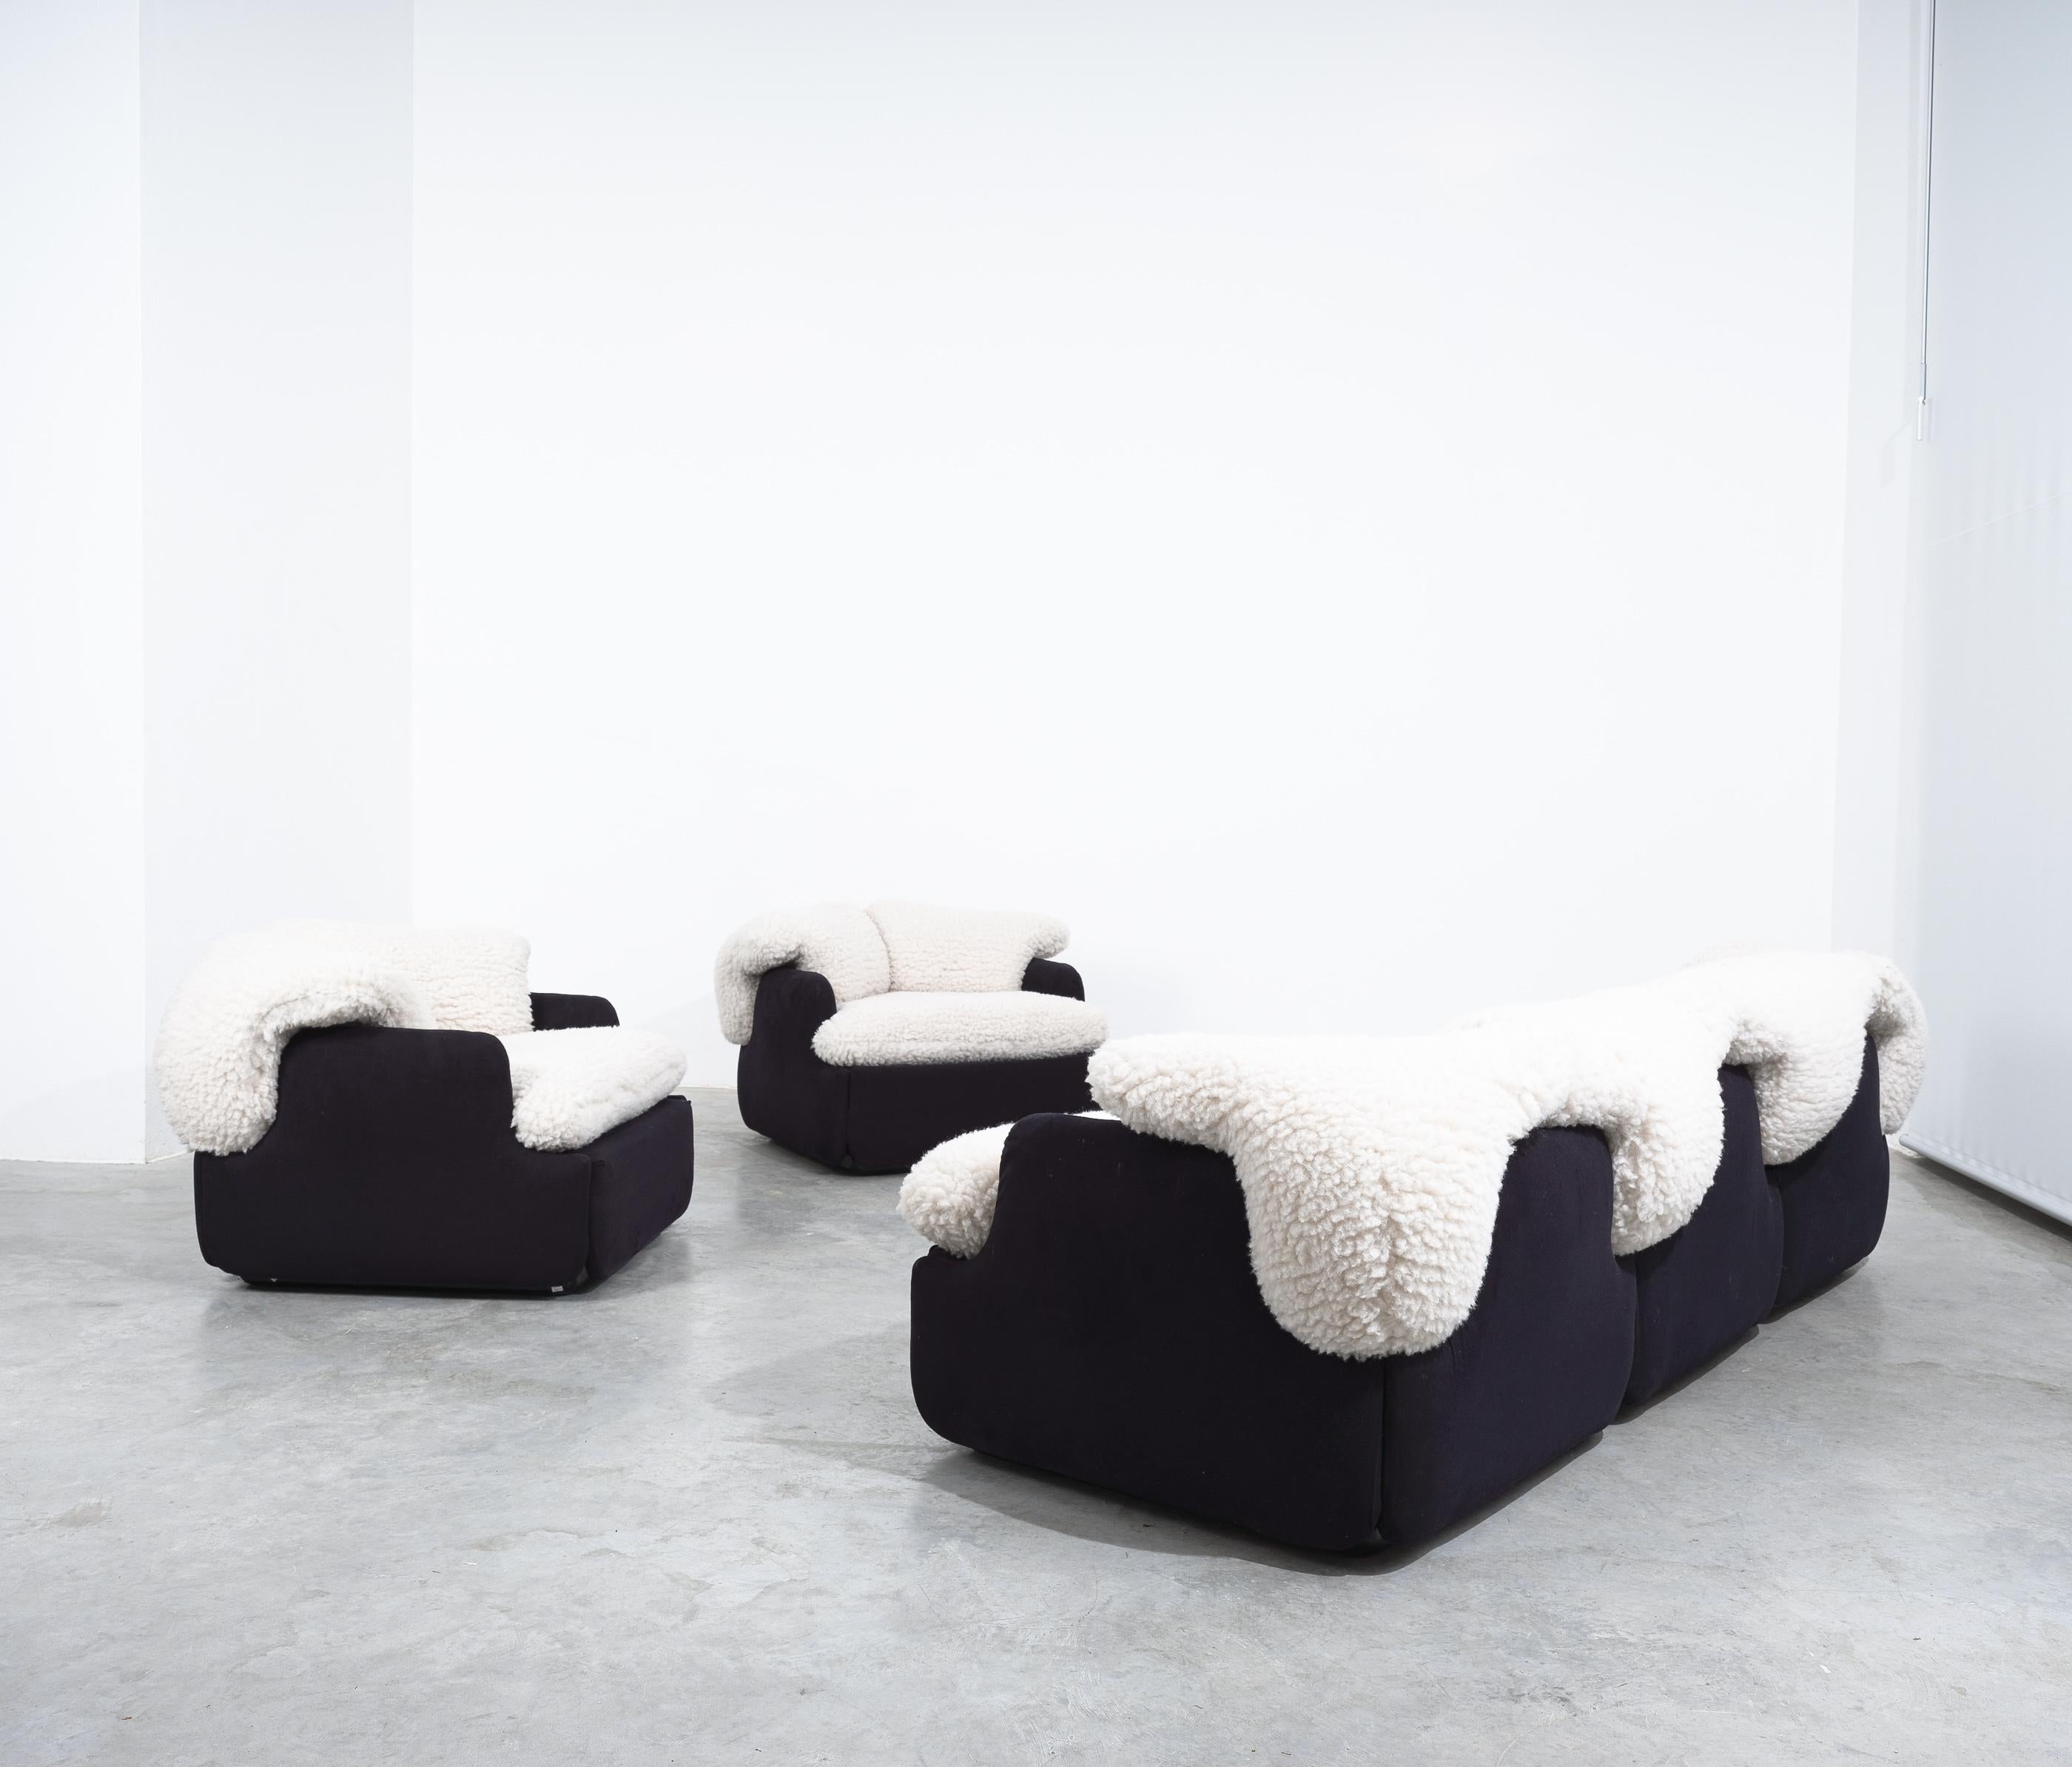 Alberto Rosselli Sofa For Saporiti 'Confidential' White Black Wool, Italy 1970 In Good Condition For Sale In Vienna, AT